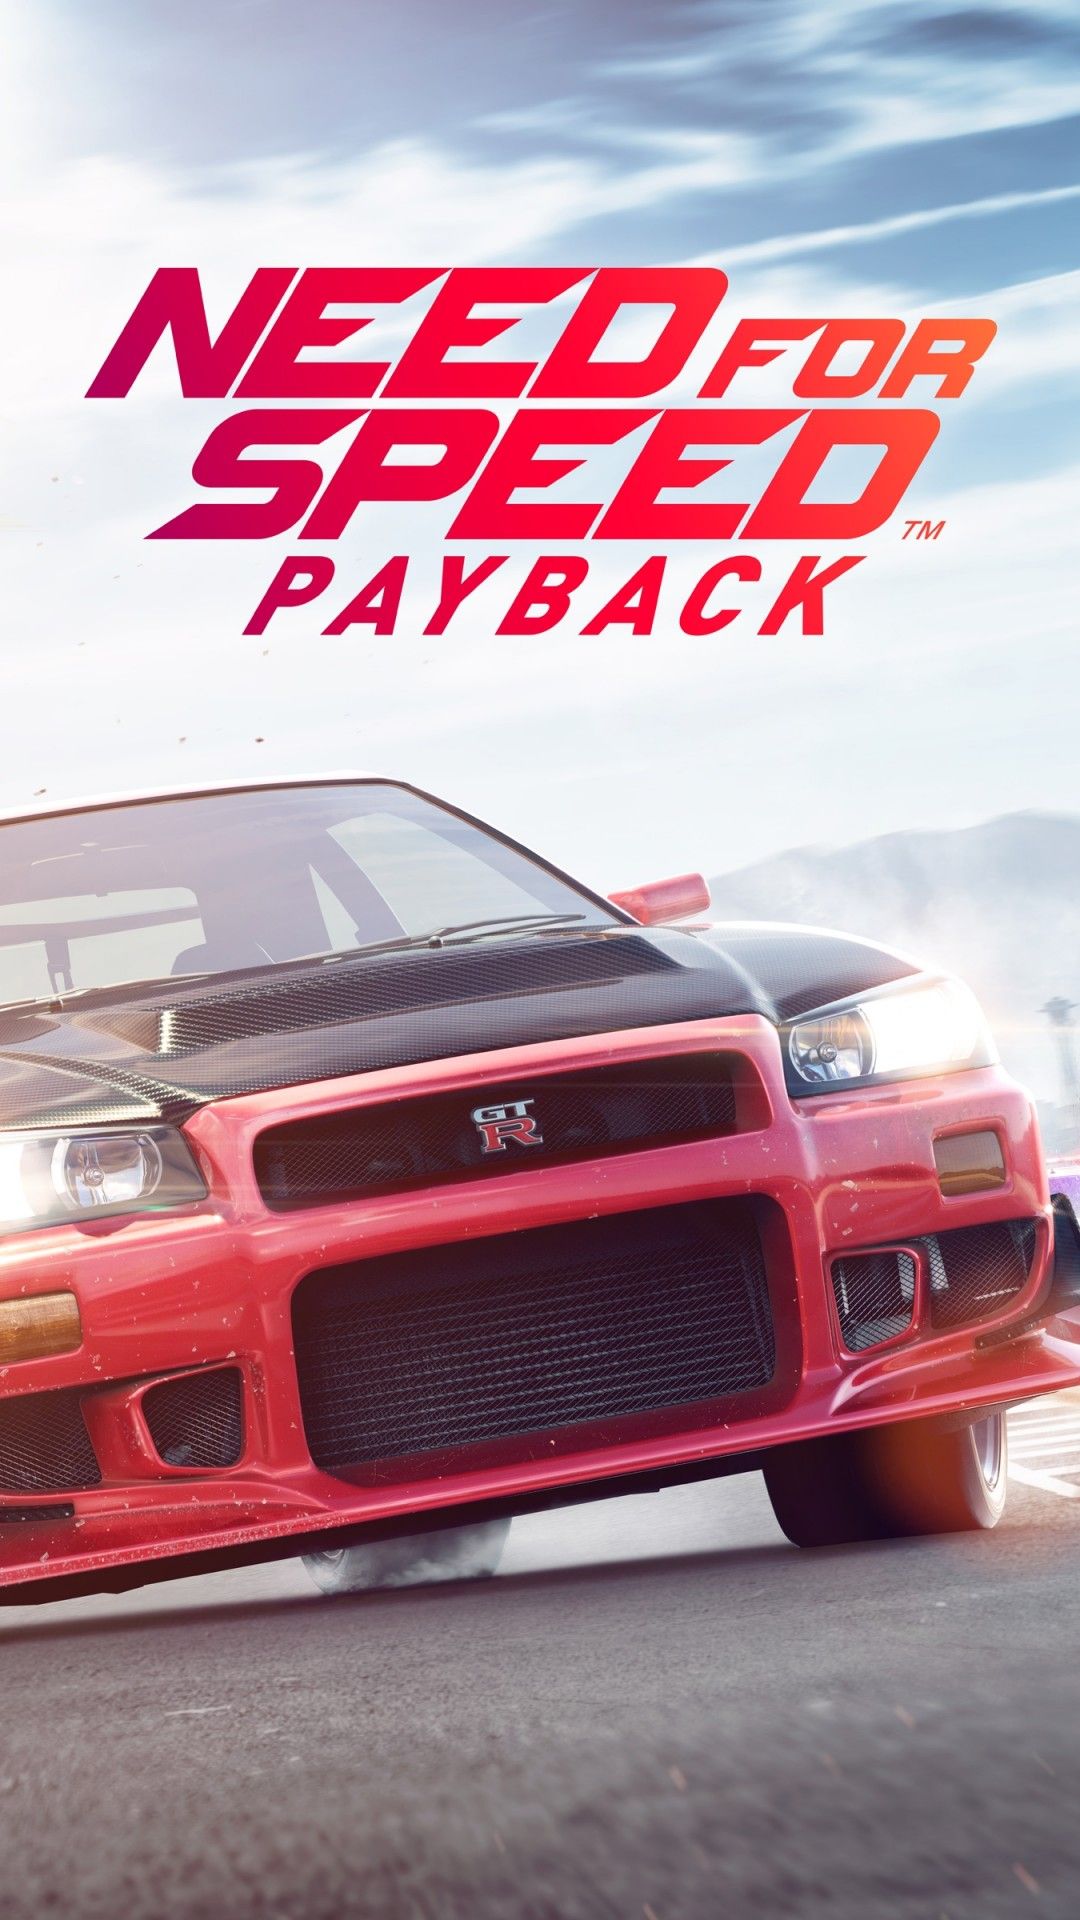 Need For Speed Payback Iphone11 スマホ壁紙 待受画像ギャラリー